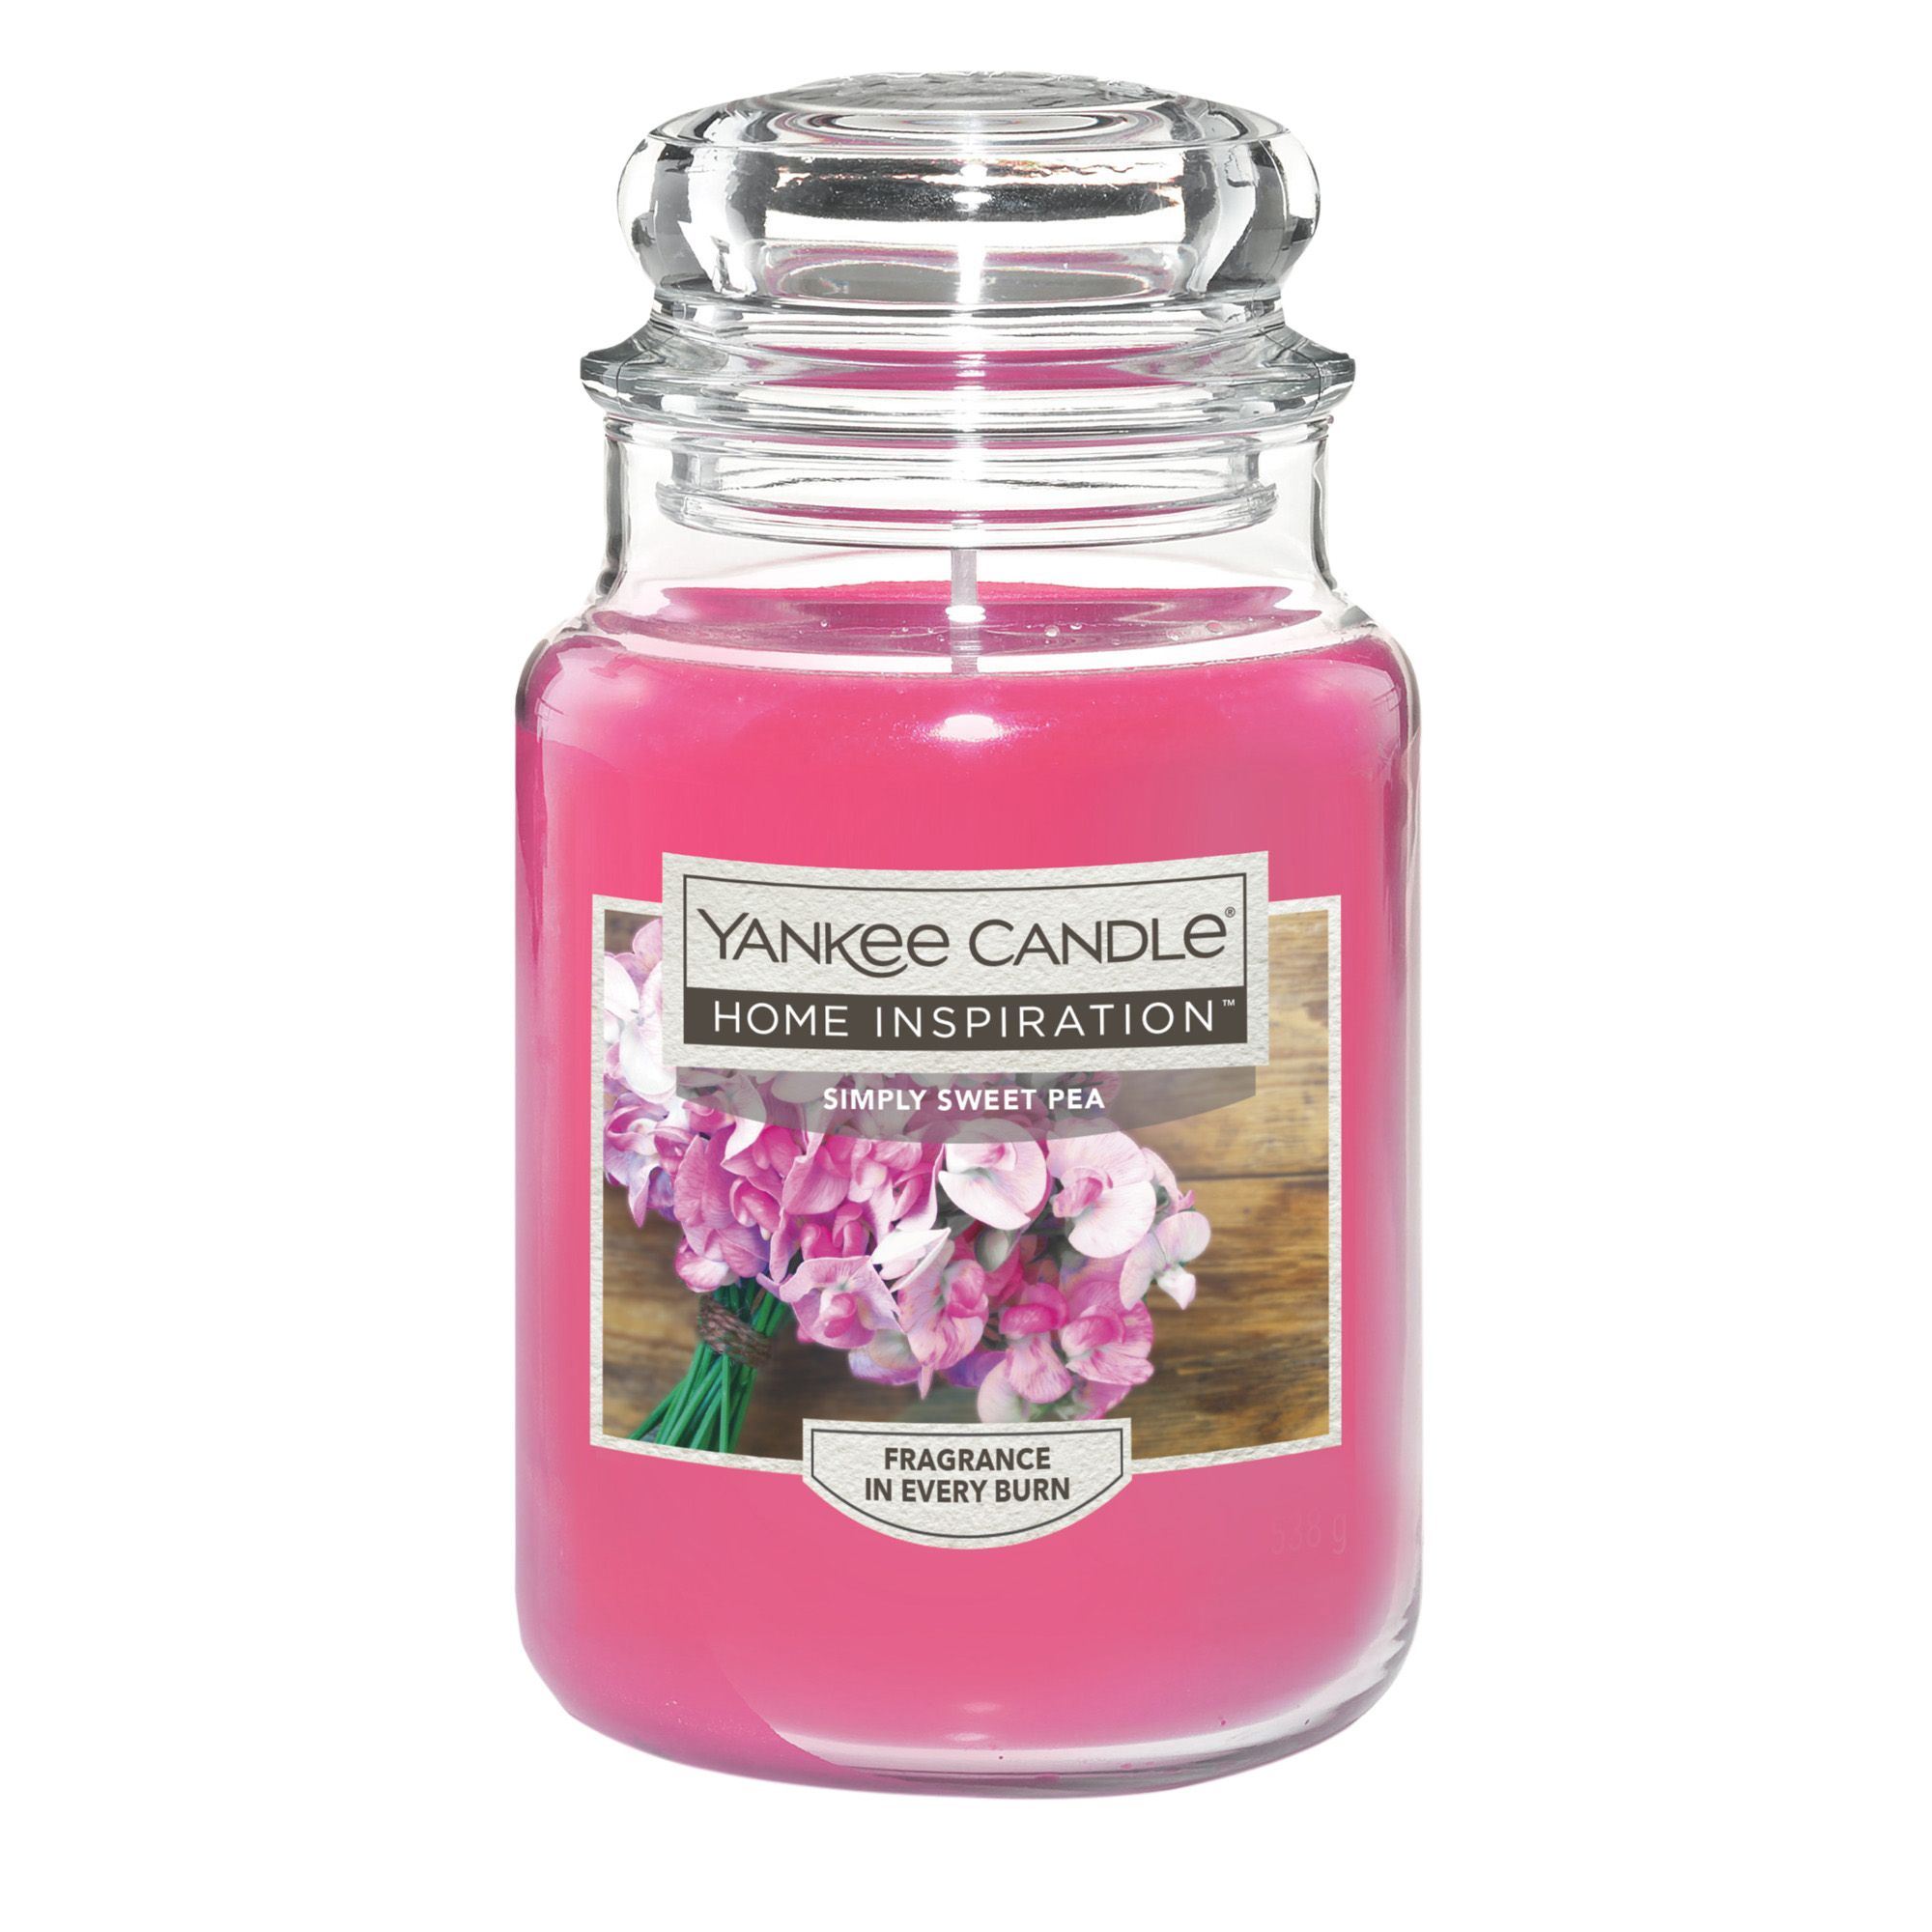 Yankee Candle Jar Candle, 19 oz. - Simply Sweet Pea | BJ's Wholesale Club